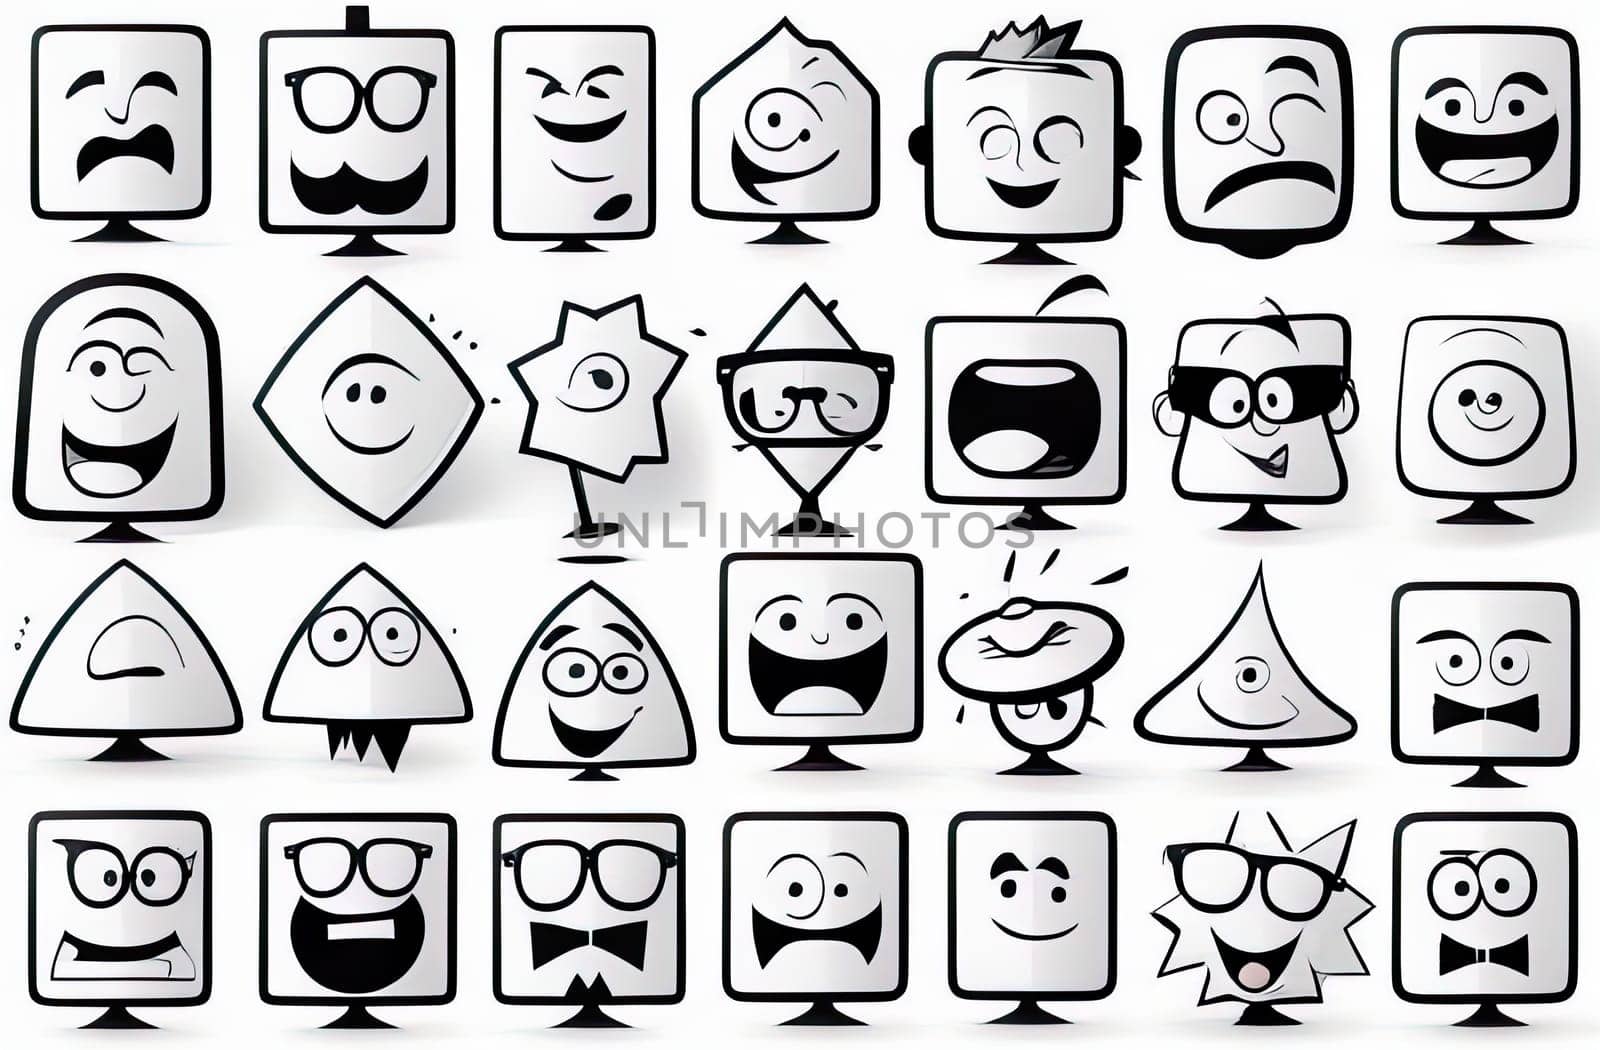 Funny Cartoon abstract shapes cute comic characters posters avatars logo templates set of flat by Proxima13